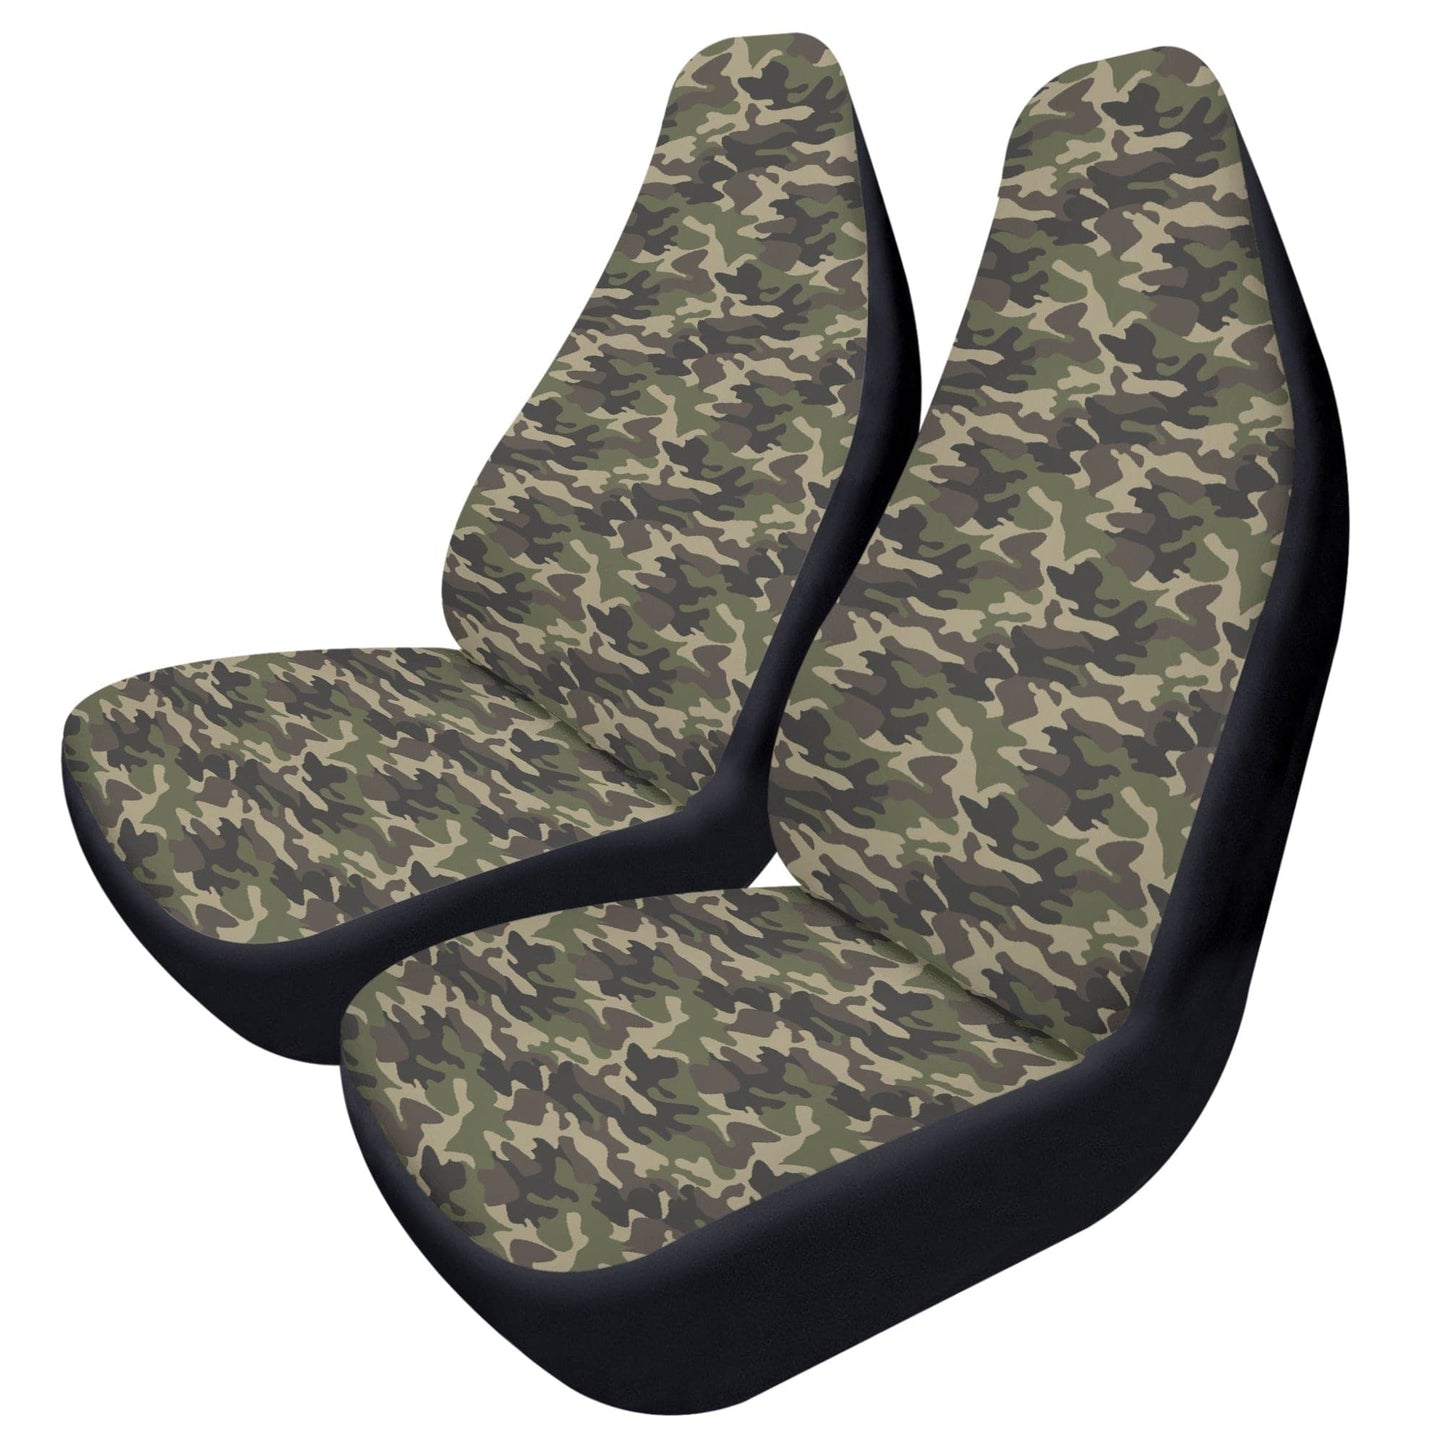 Camouflage Vehicle Front Bucket Seat Covers